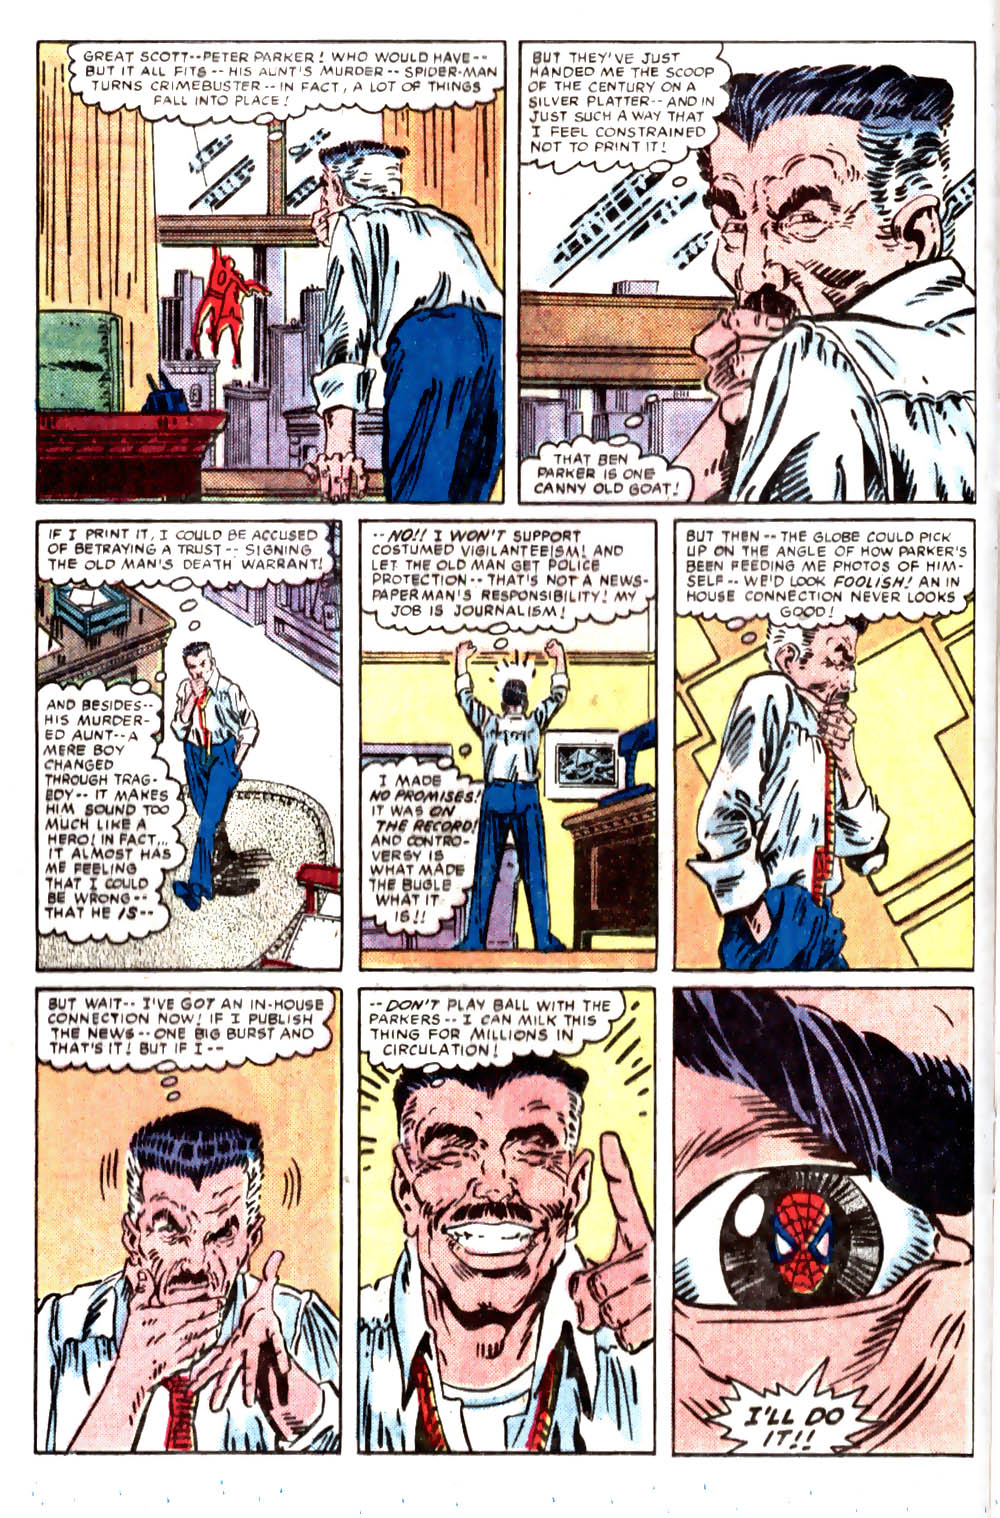 What If? (1977) issue 46 - Spiderman's uncle ben had lived - Page 19